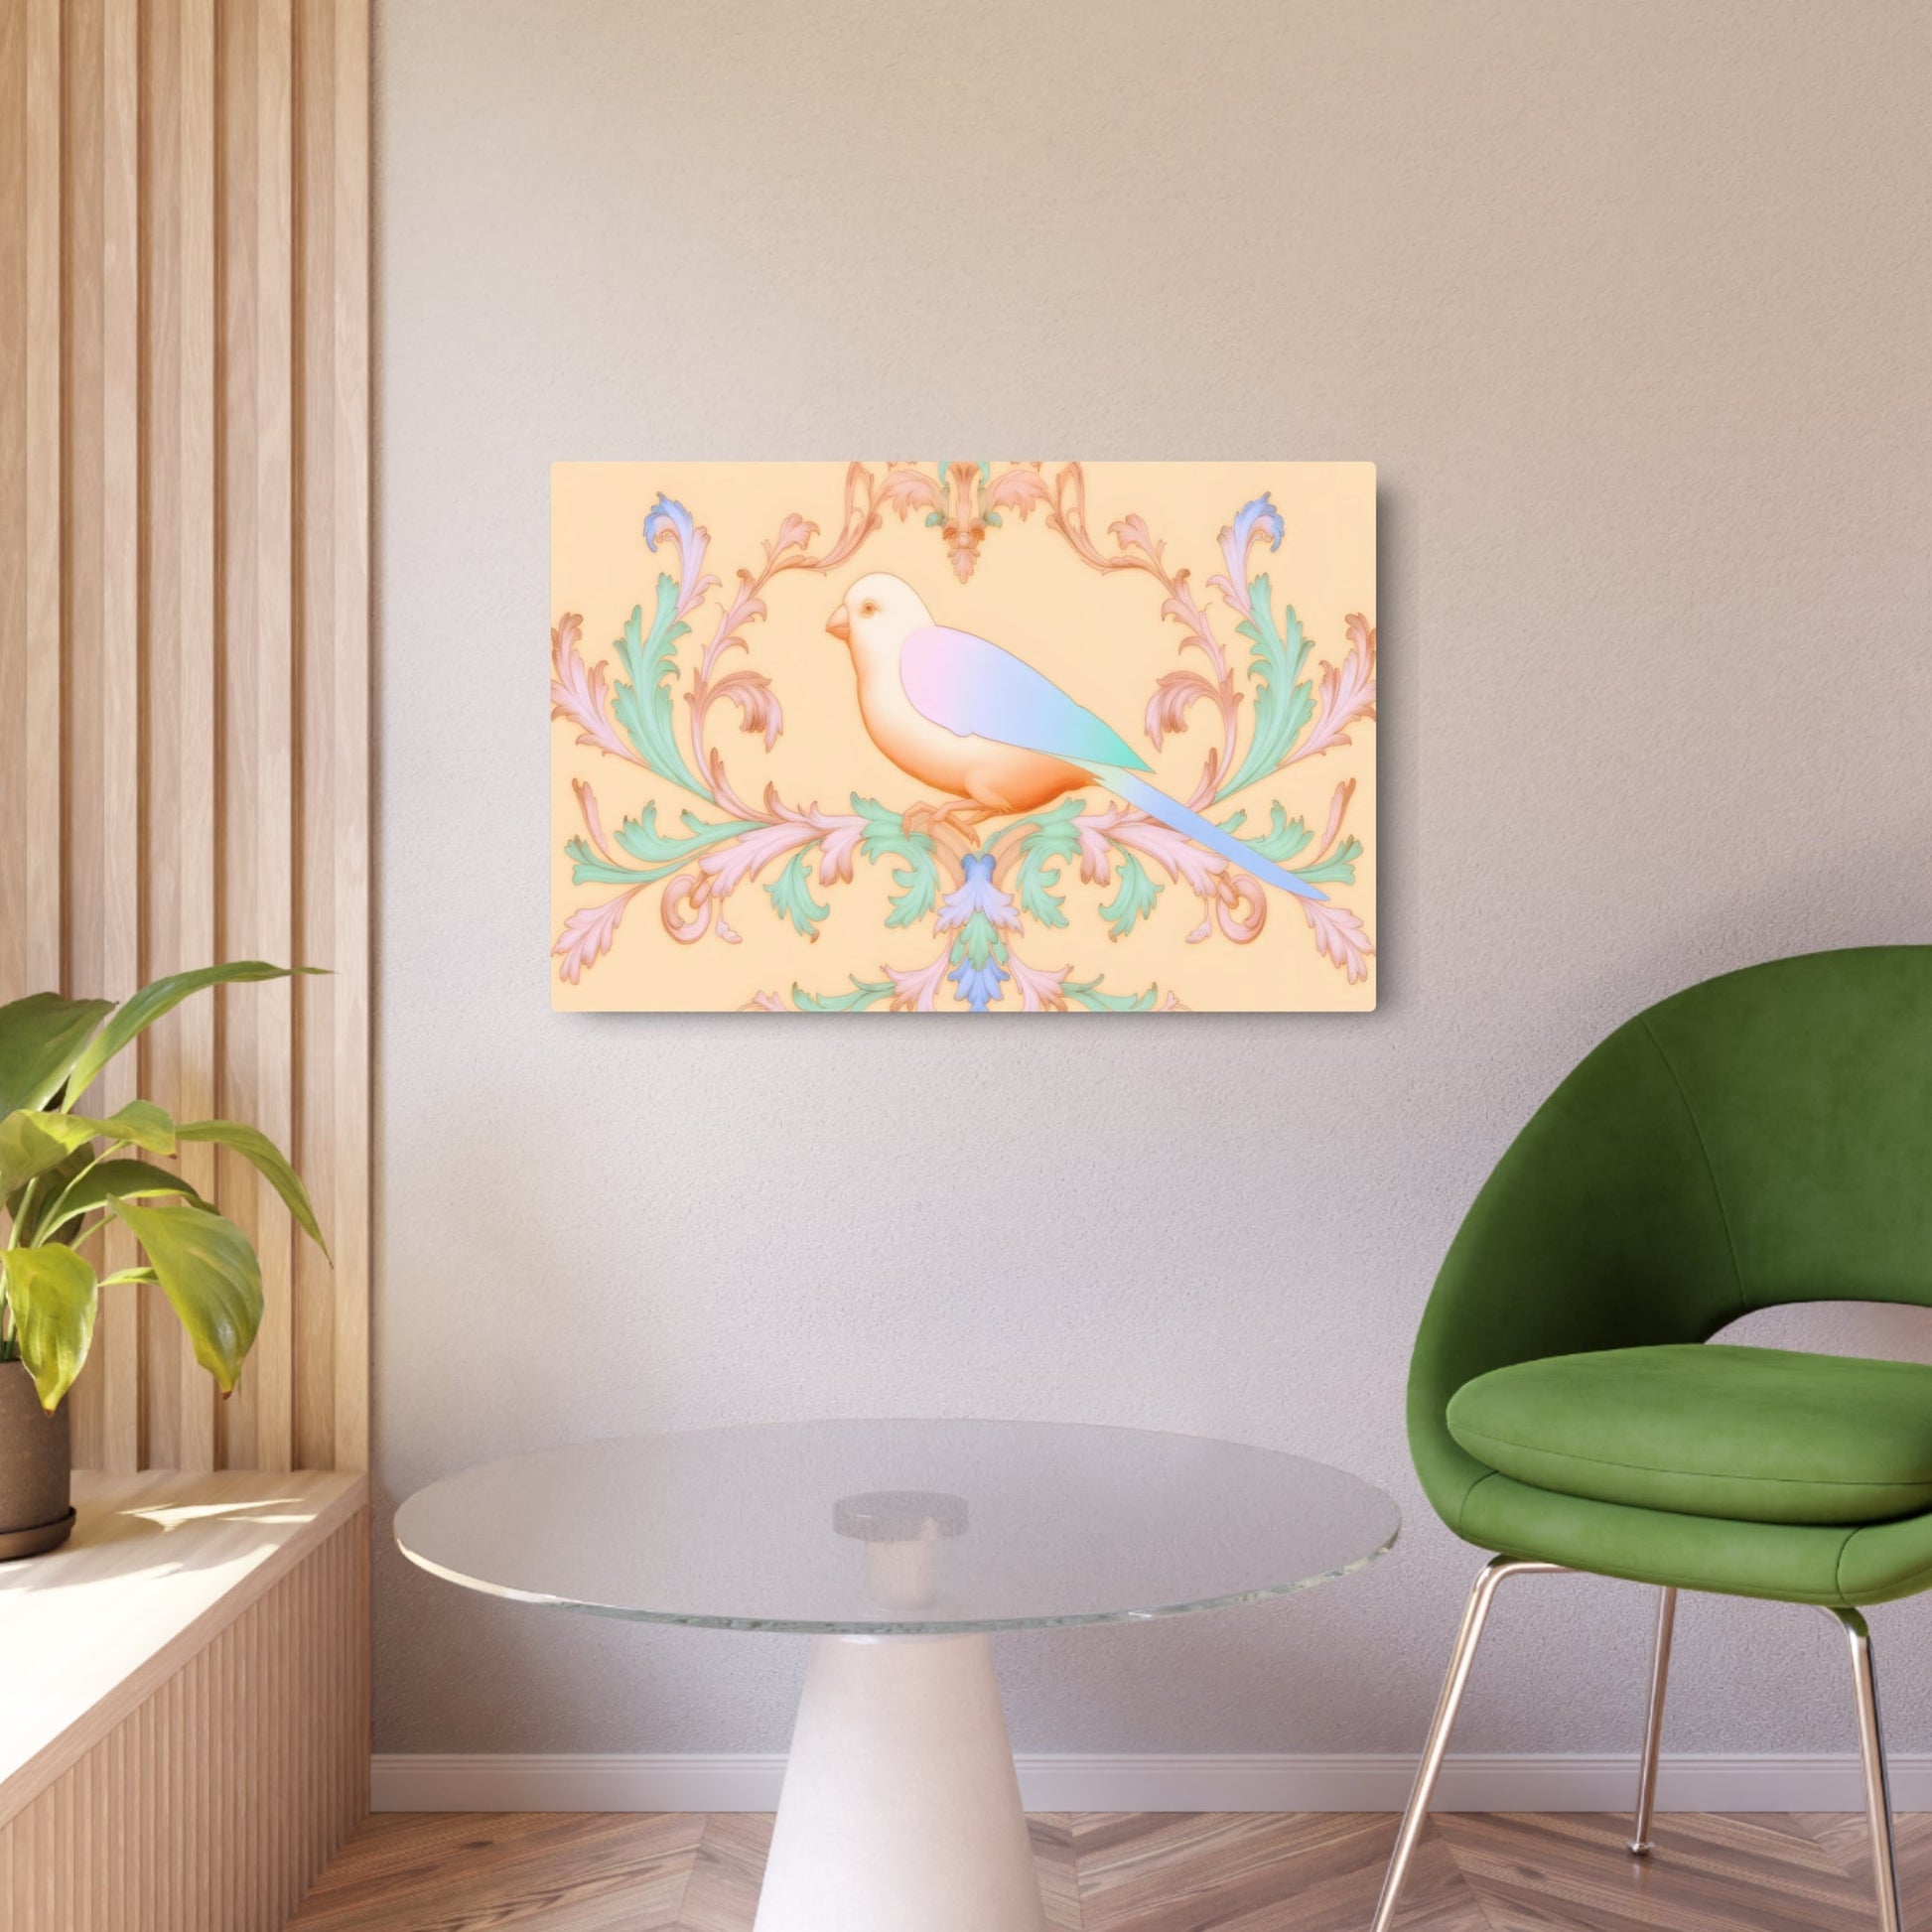 Metal Poster Art | "Rococo Style Bird Artwork - Western Art Styles: Intricate Pastel Palette Design with Delicate Detailing in Rococo Tradition" - Metal Poster Art 36″ x 24″ (Horizontal) 0.12''